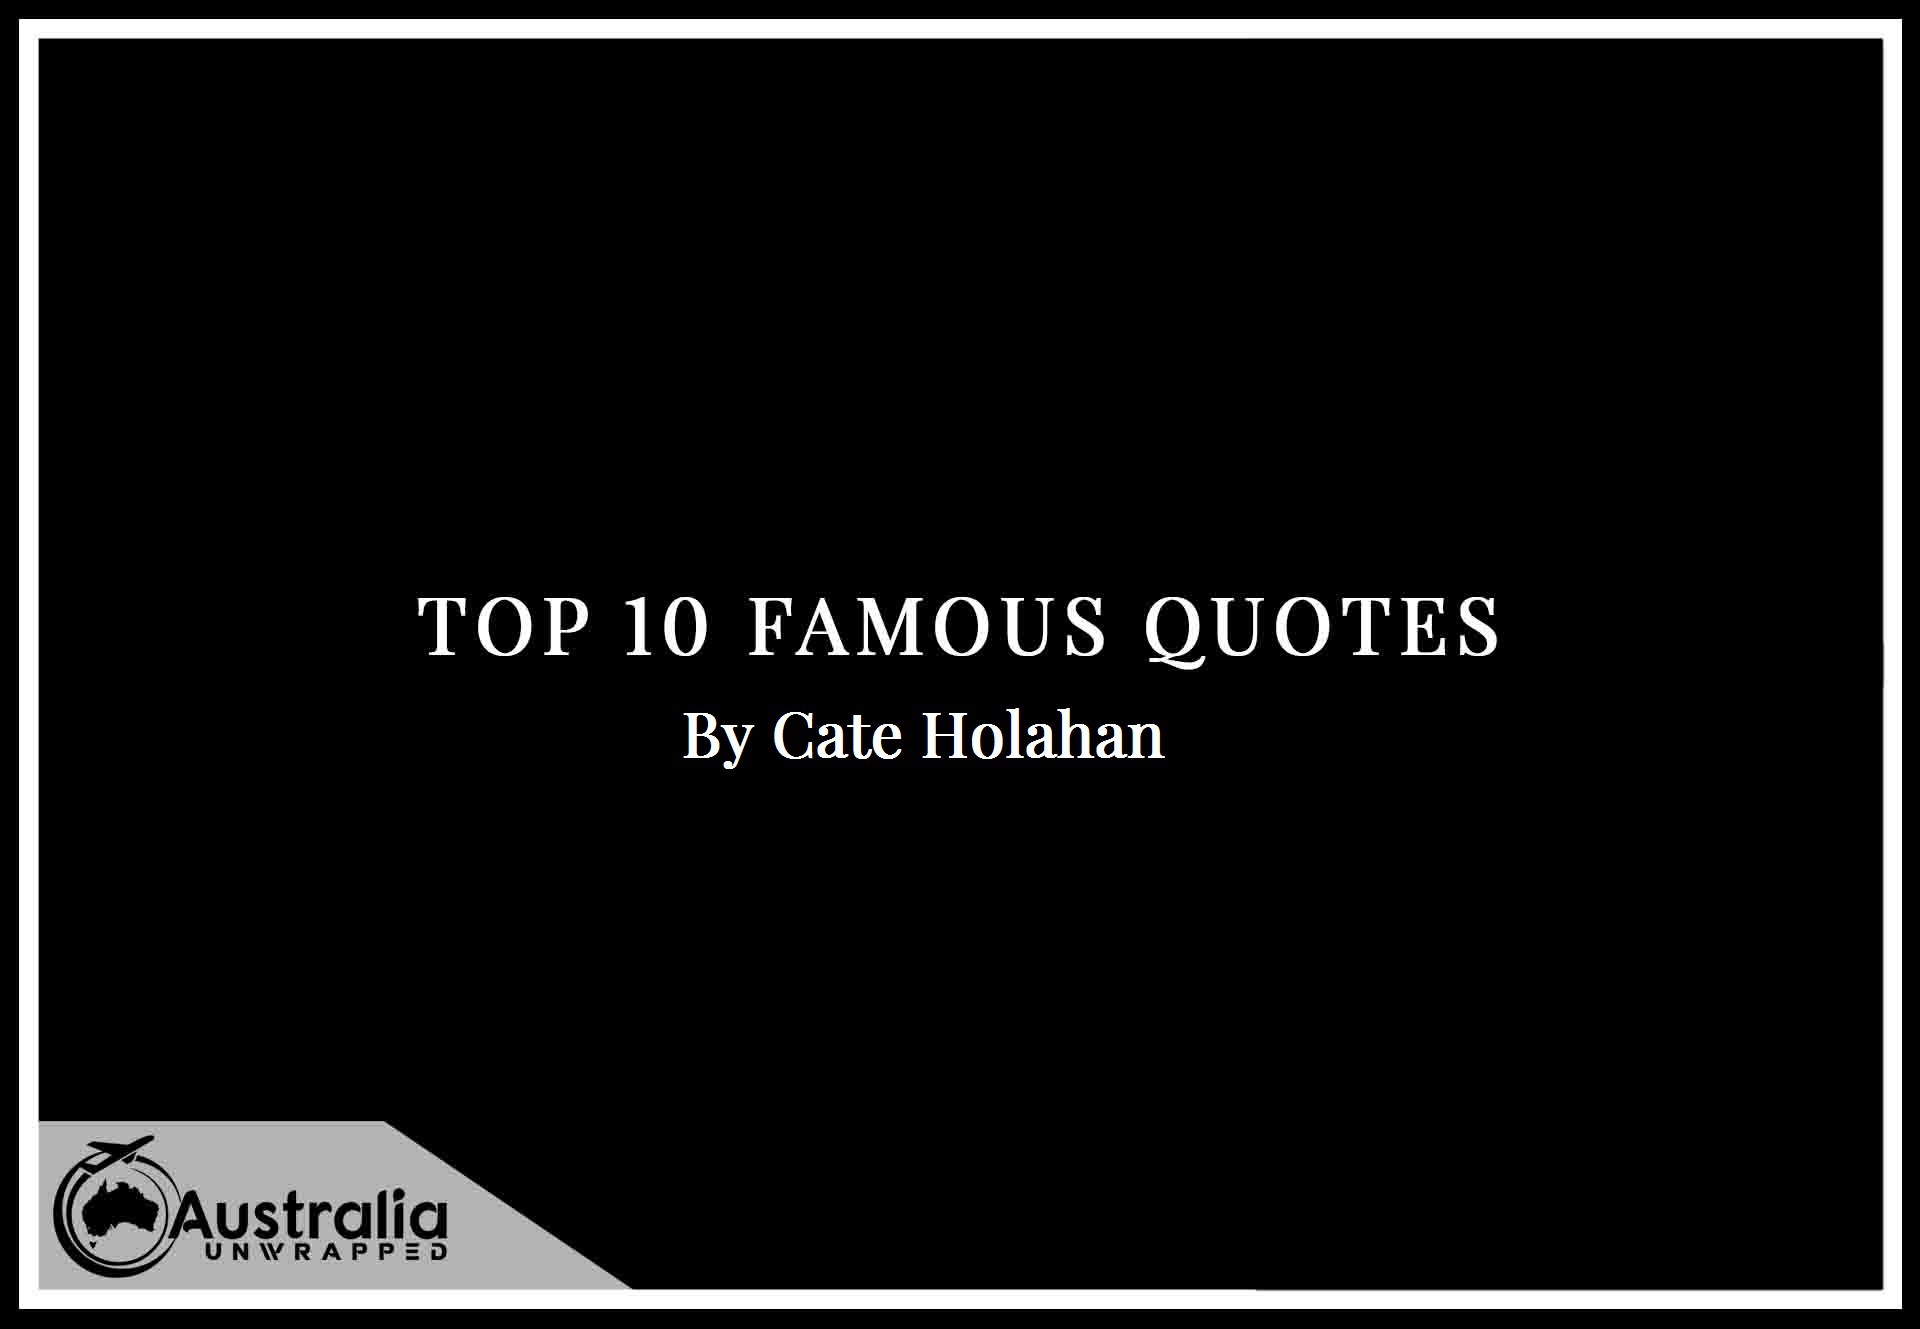 Cate Holahan’s Top 10 Popular and Famous Quotes